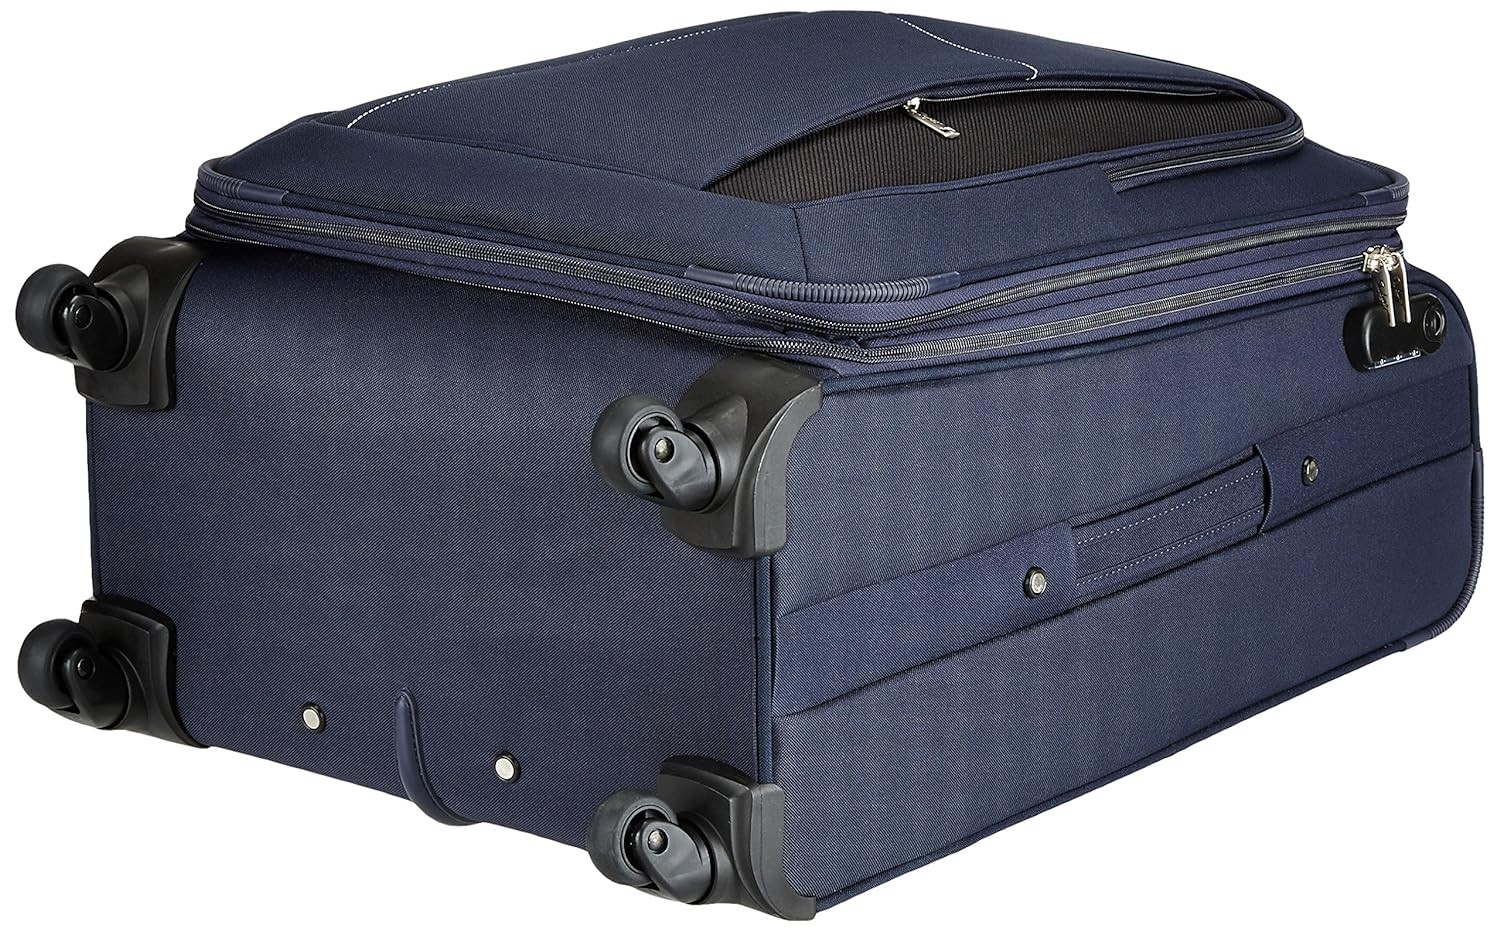 Skybags 68 cms Medium Check-in Polyester Soft Sided 4 Wheels Spinner LuggageSuitcaseTrolley Bag- Blue